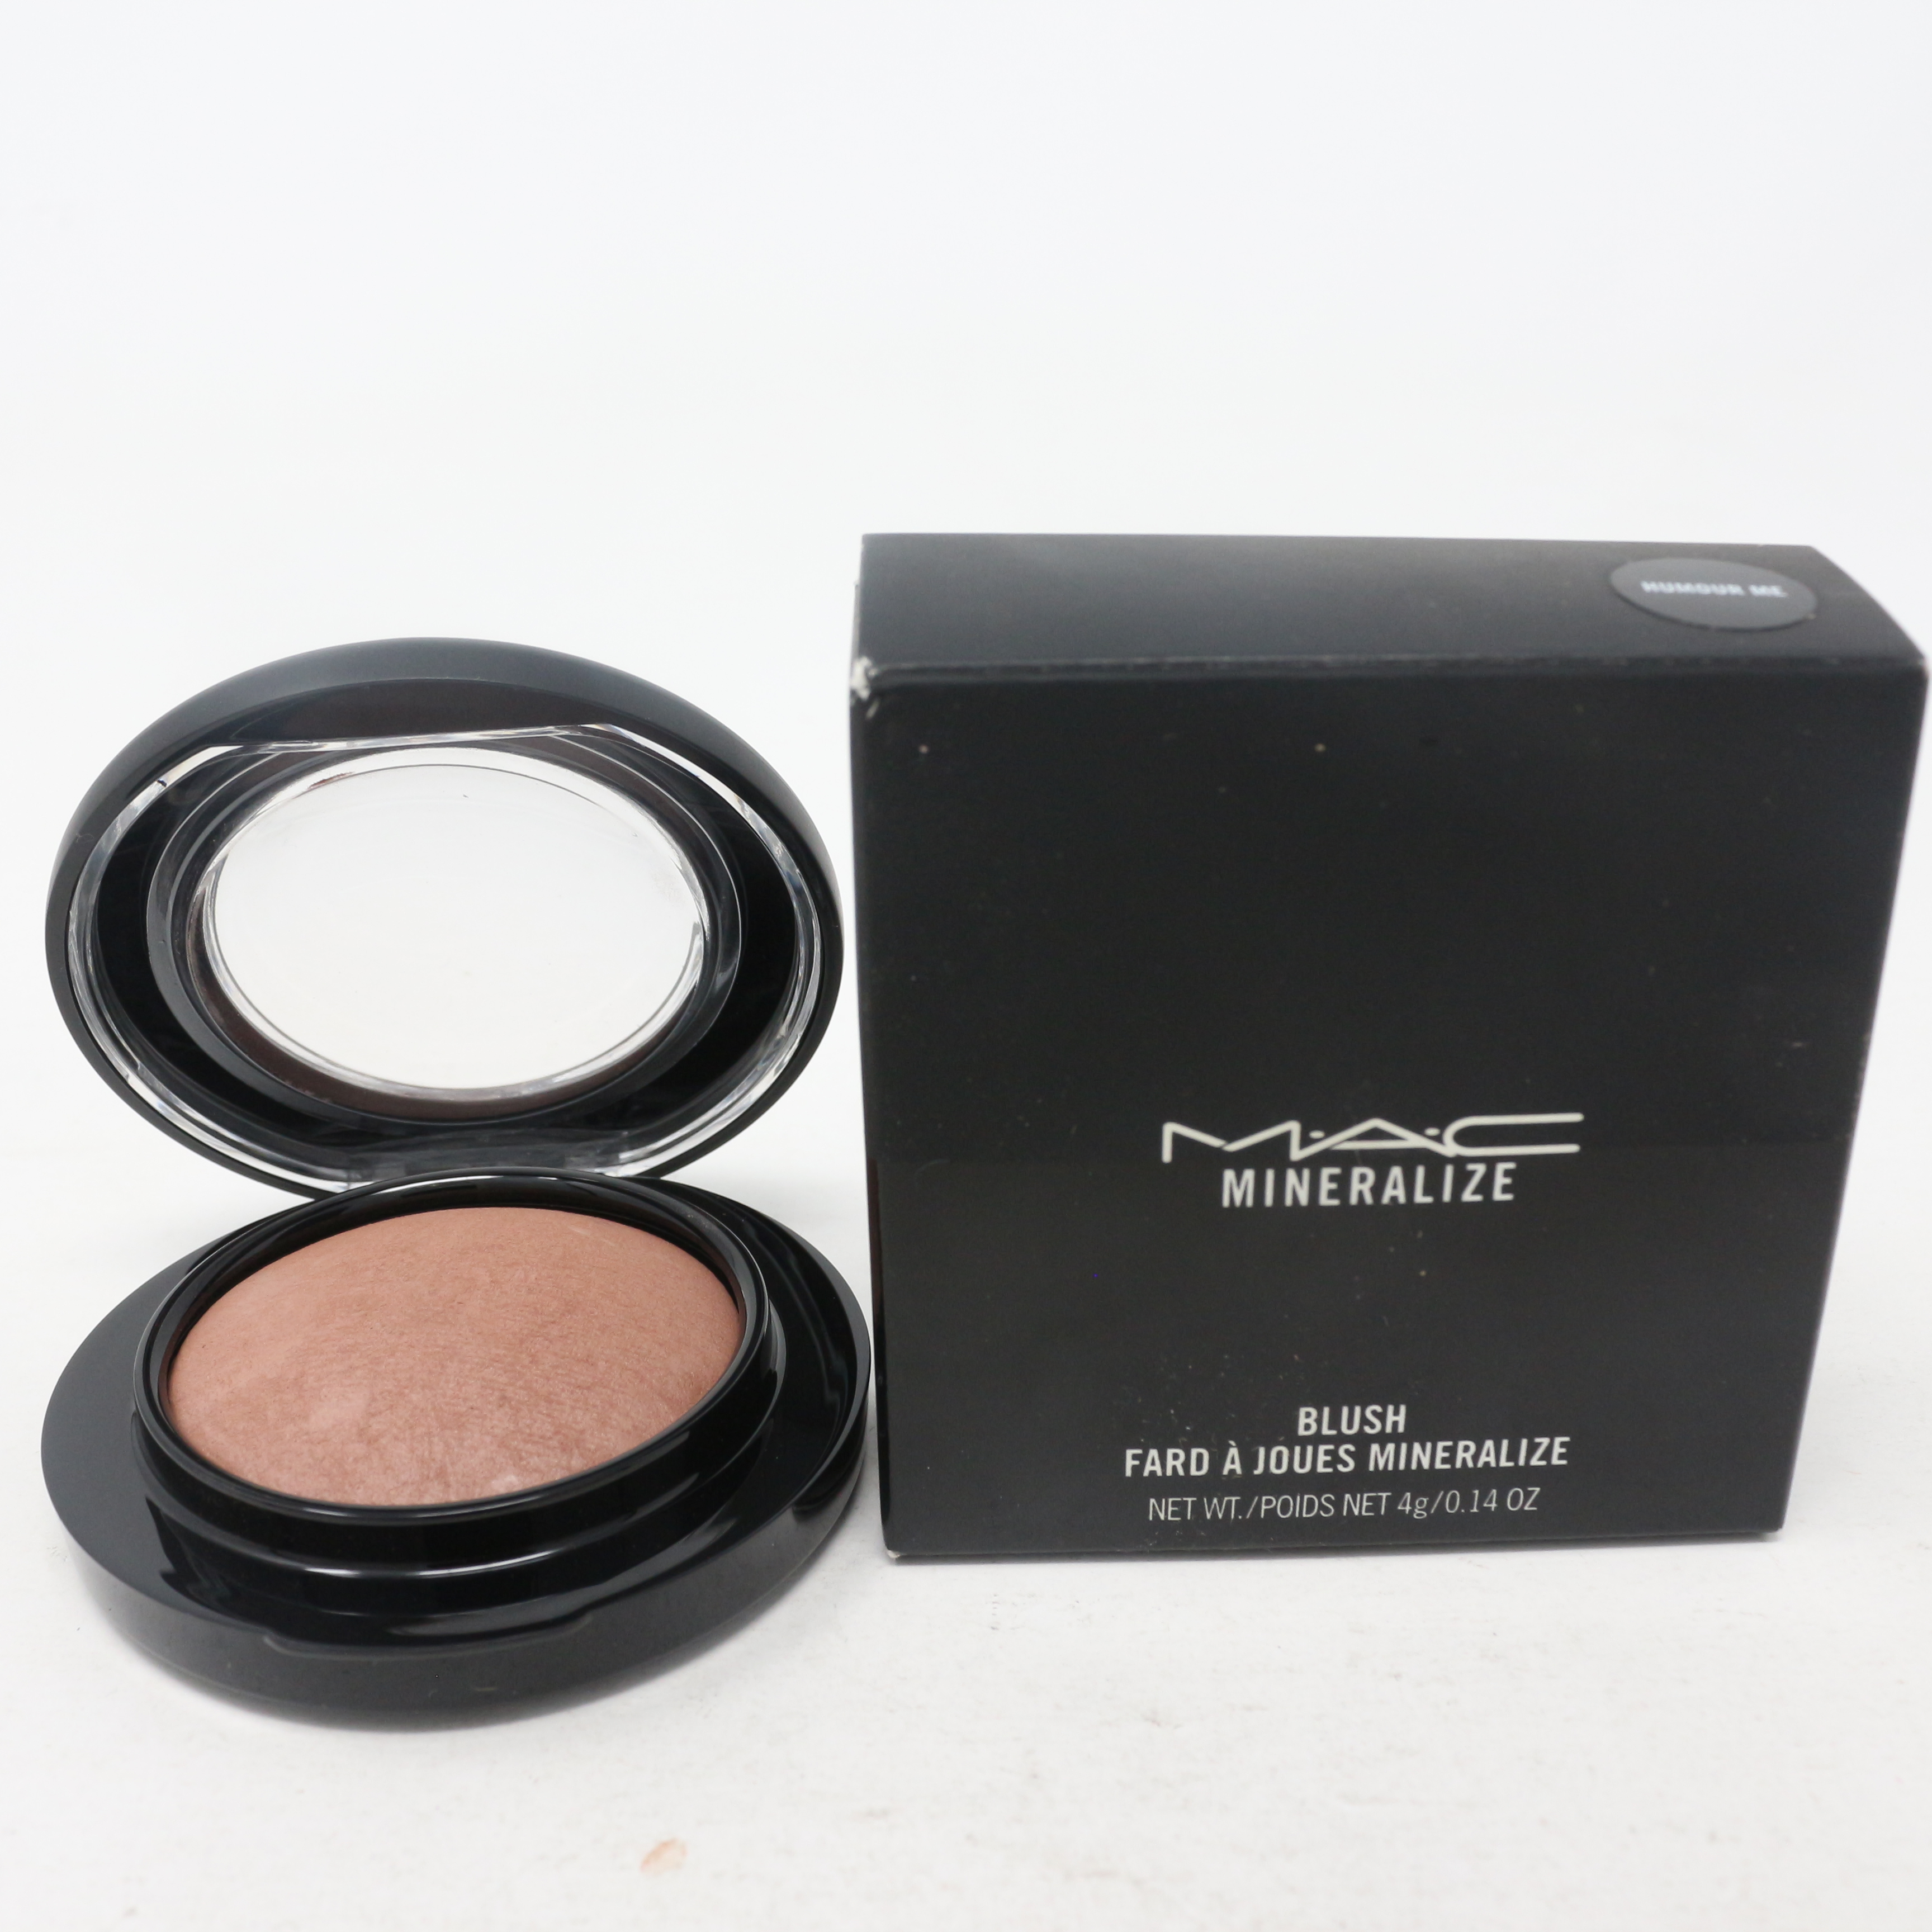 Demaquillant Mac mineralise charged water – olayinkamarket